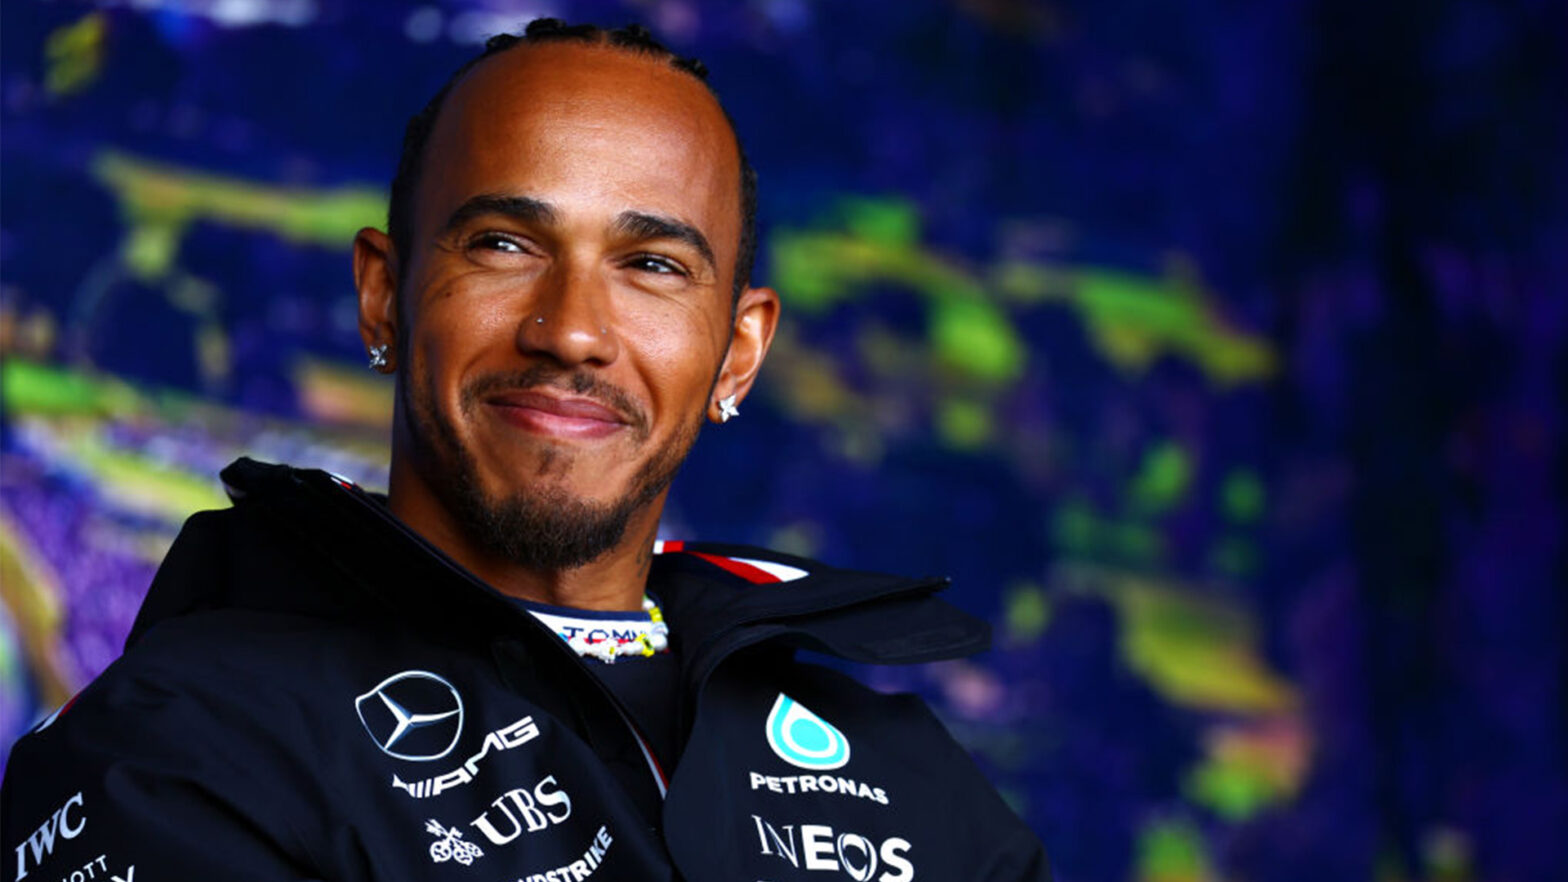 Formula 1 Champion Lewis Hamilton Is Co-Founder Of The First-Ever Distilled Non-Alcoholic Blue Agave Spirit In The World